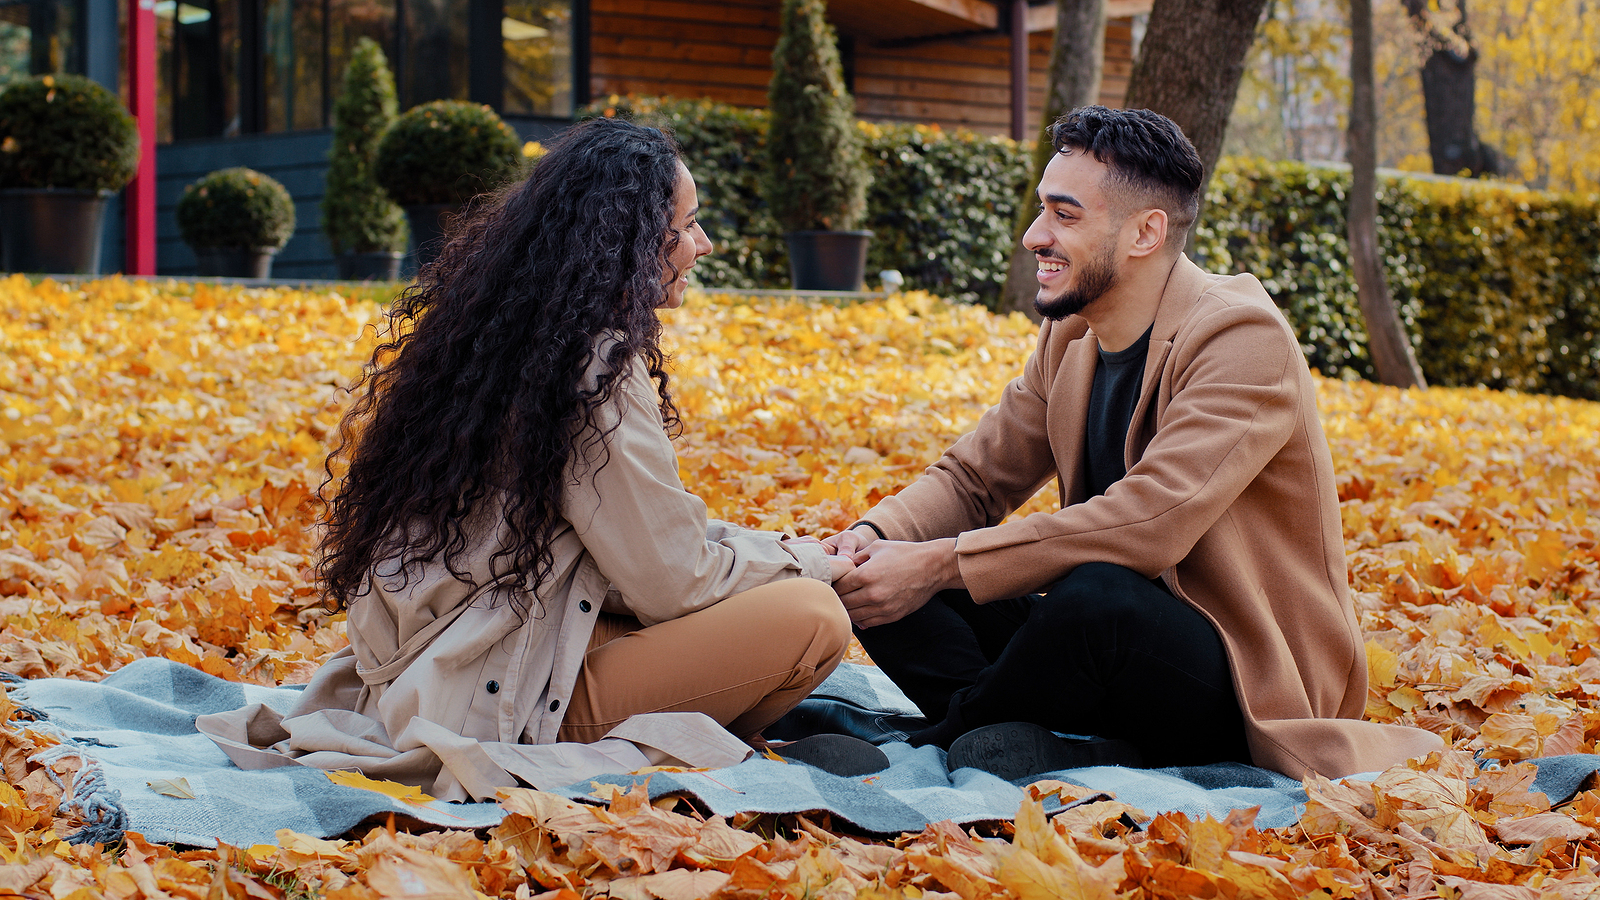 Happy Hispanic couple on a date in an autumn park. They are young, holding hands, laughing, and smiling while sitting cross-legged on a plaid blanket amidst colorful leaves outdoors. The bearded guy is emotionally talking with his curly-haired girlfriend.